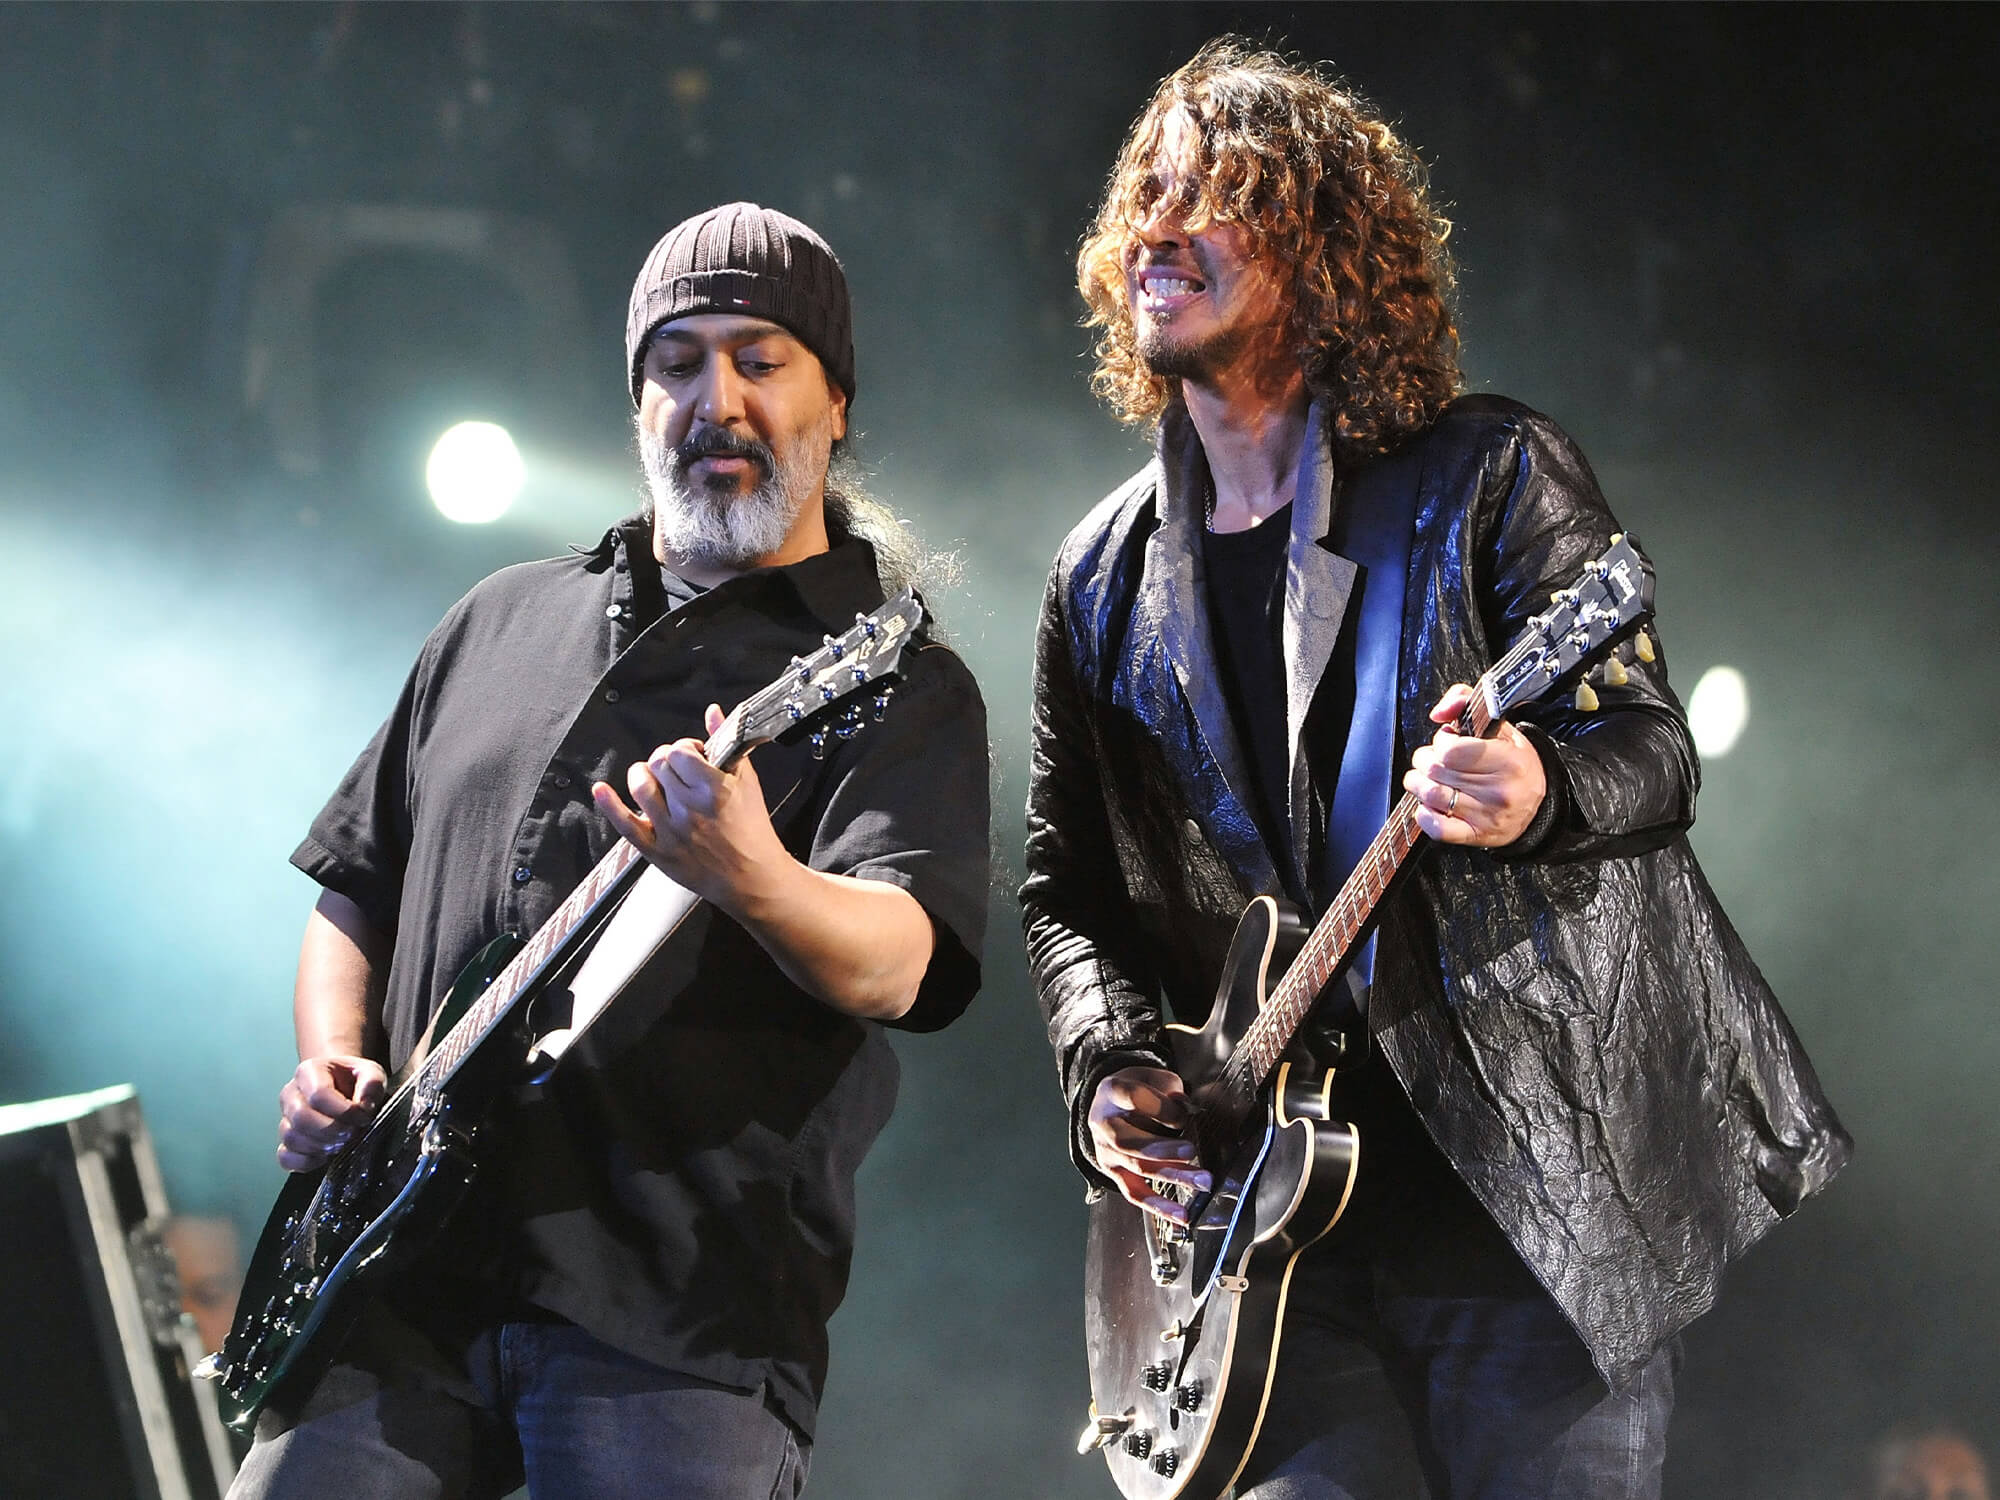 Kim Thayil and Chris Cornell playing guitar together on stage in 2012.